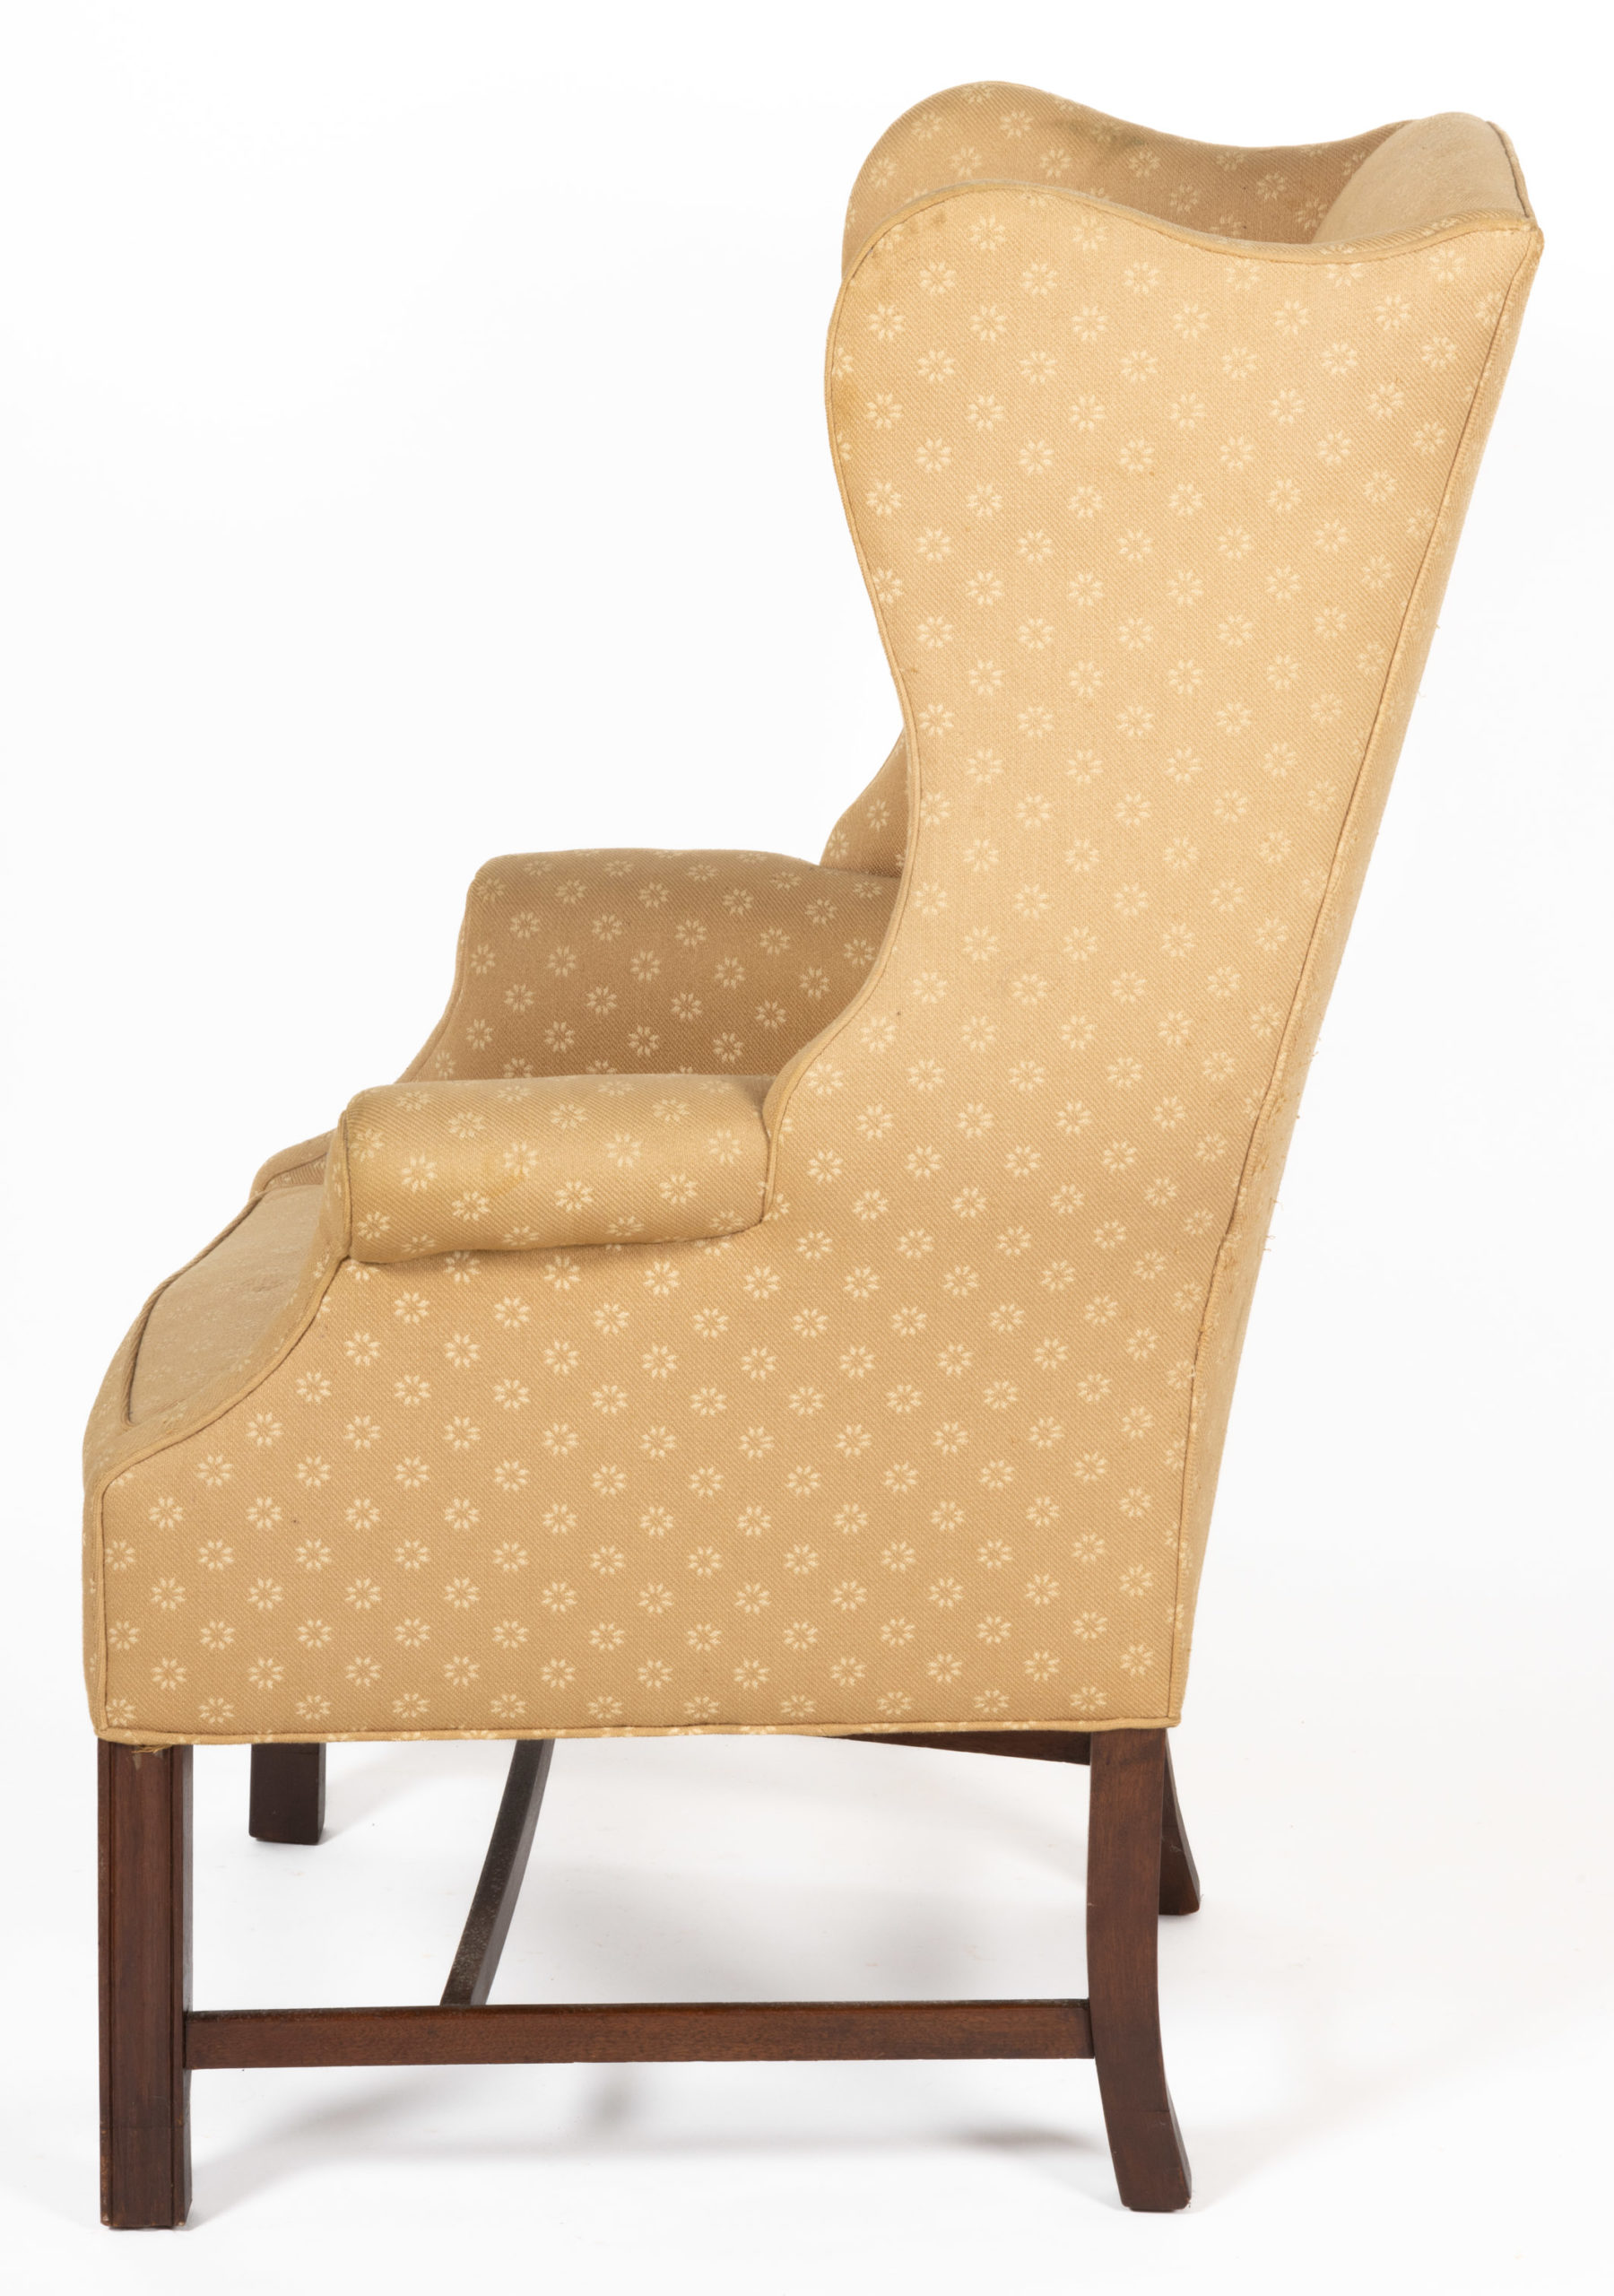 AMERICAN MAHOGANY WING-BACK EASY CHAIR,